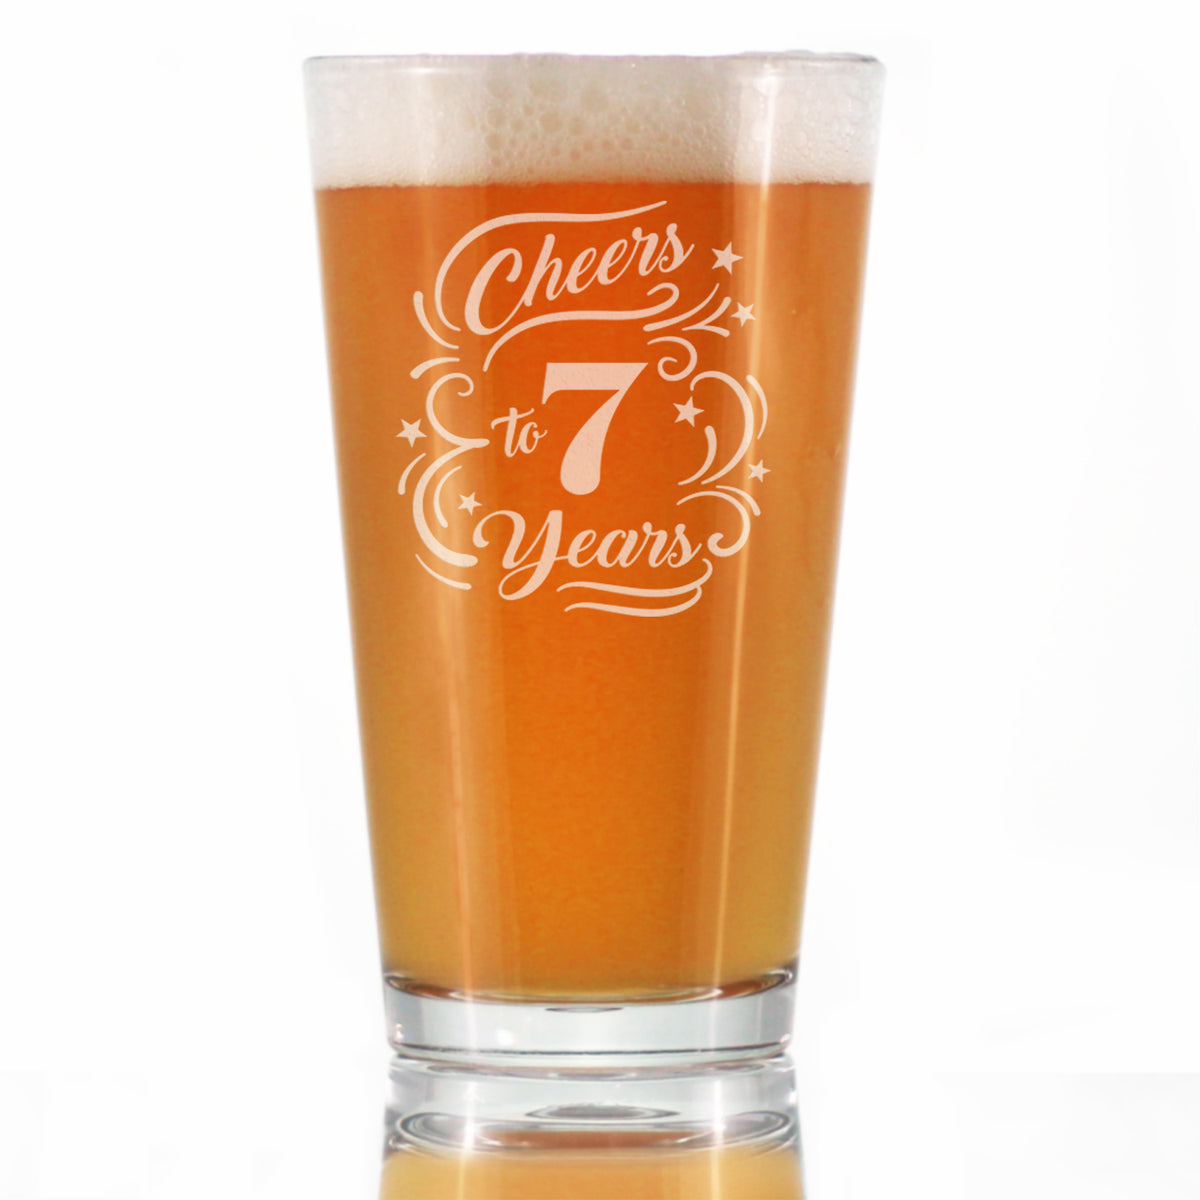 Cheers to 7 Years - Pint Glass for Beer - Gifts for Women &amp; Men - 7th Anniversary Party Decor - 16 Oz Glasses